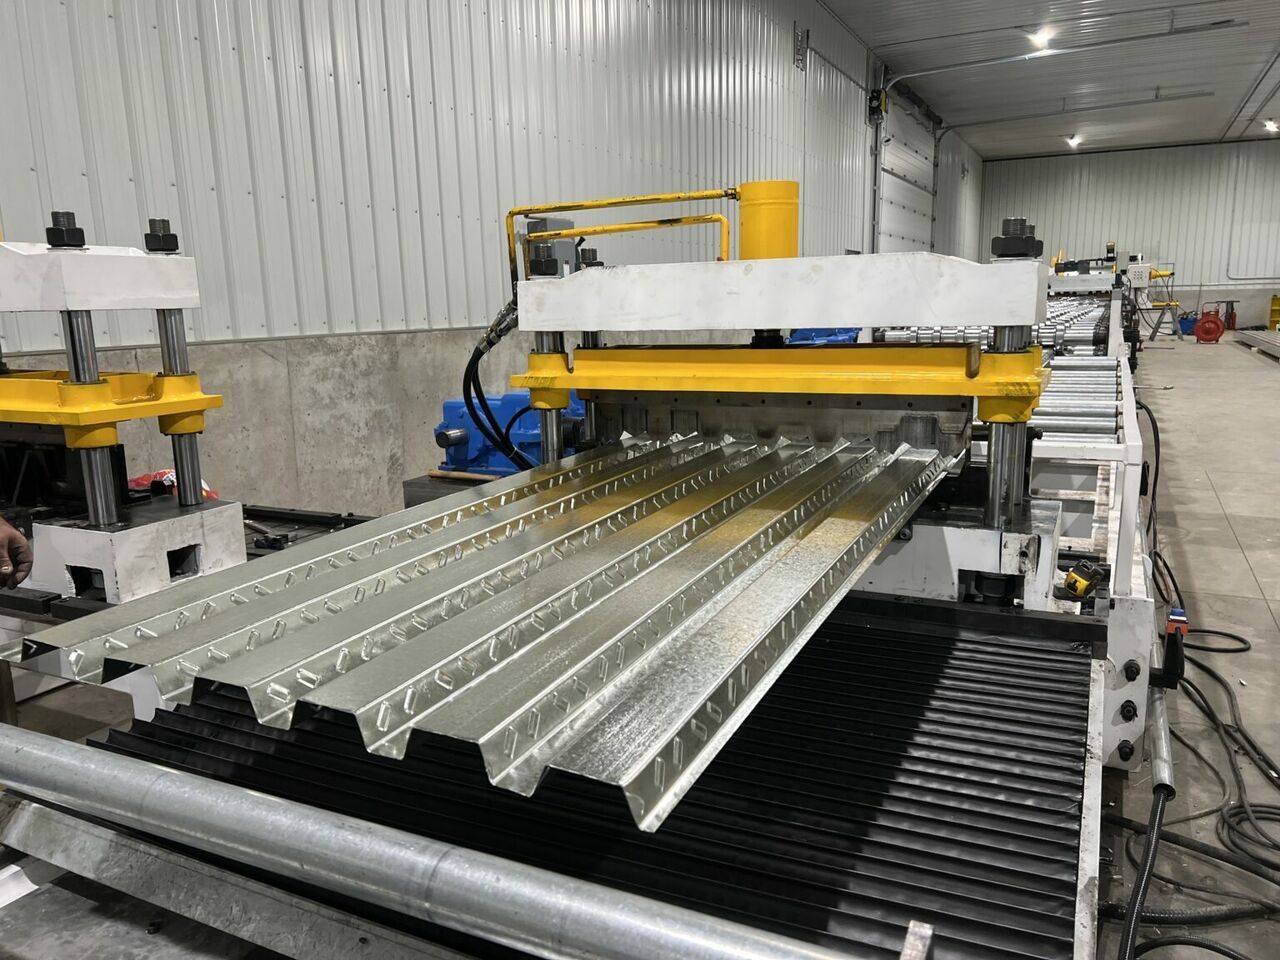 How does sheet-metal forming differ from rolling?